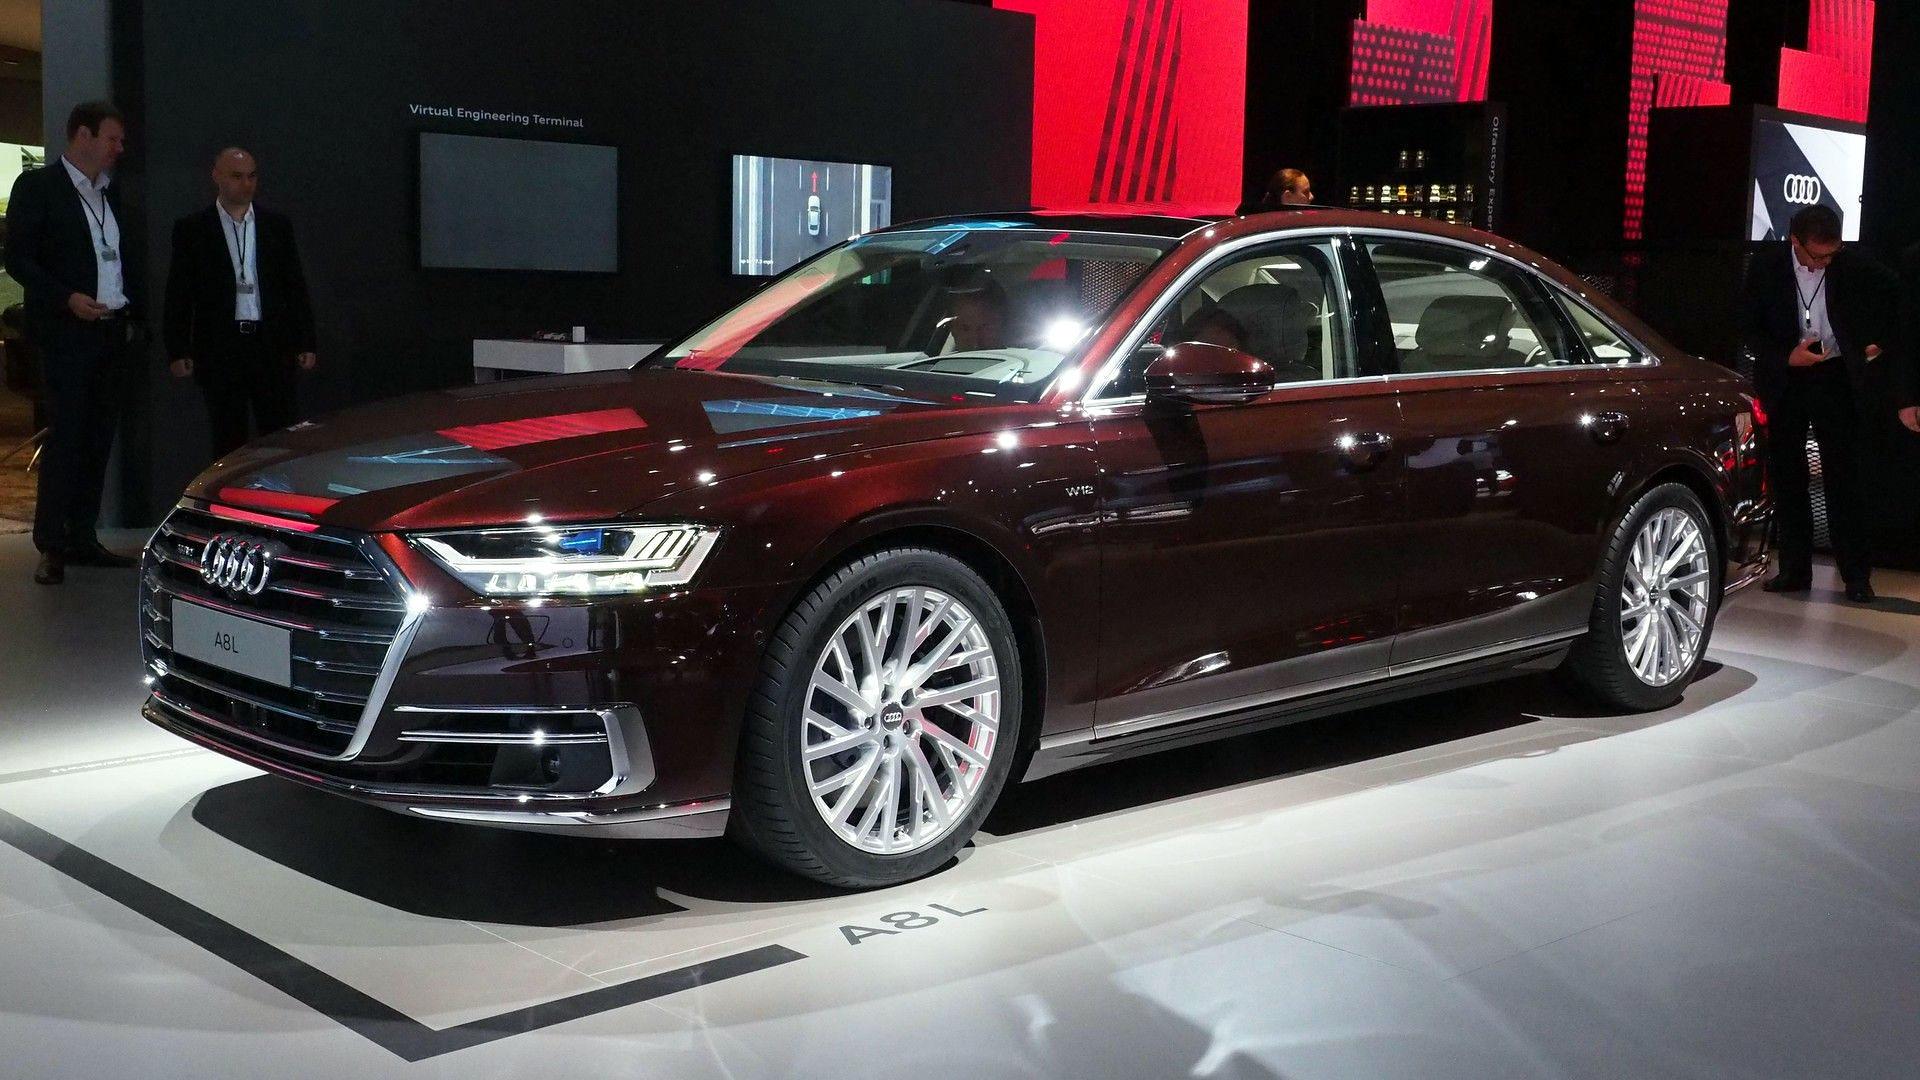 2018 Audi A8 Has Lasers, Foot Massagers, And A Big Price Tag